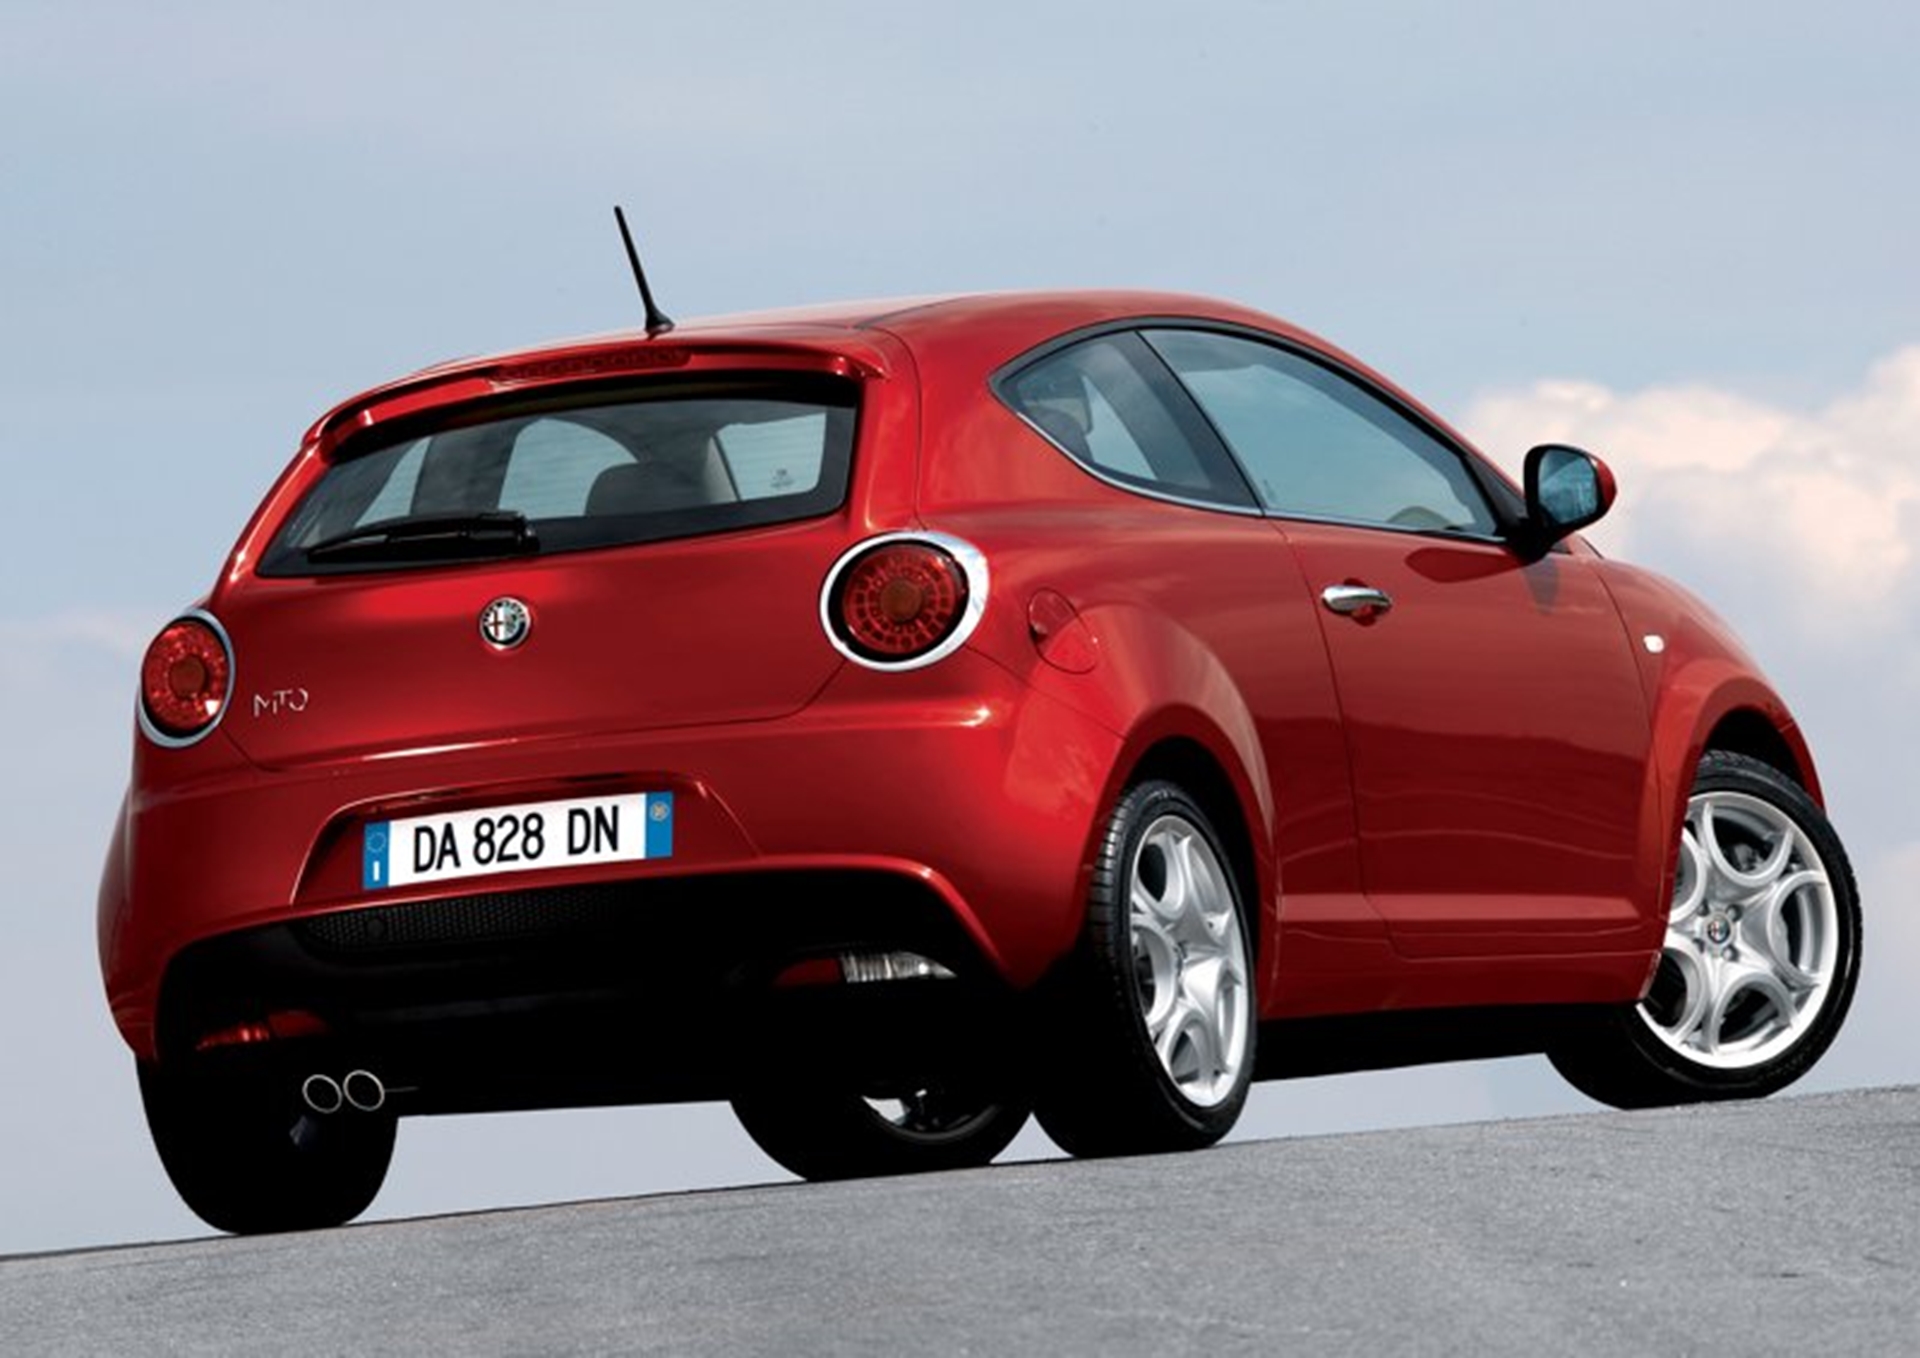 the MiTo takes centre stage on the dramatic red and black Alfa Romeo